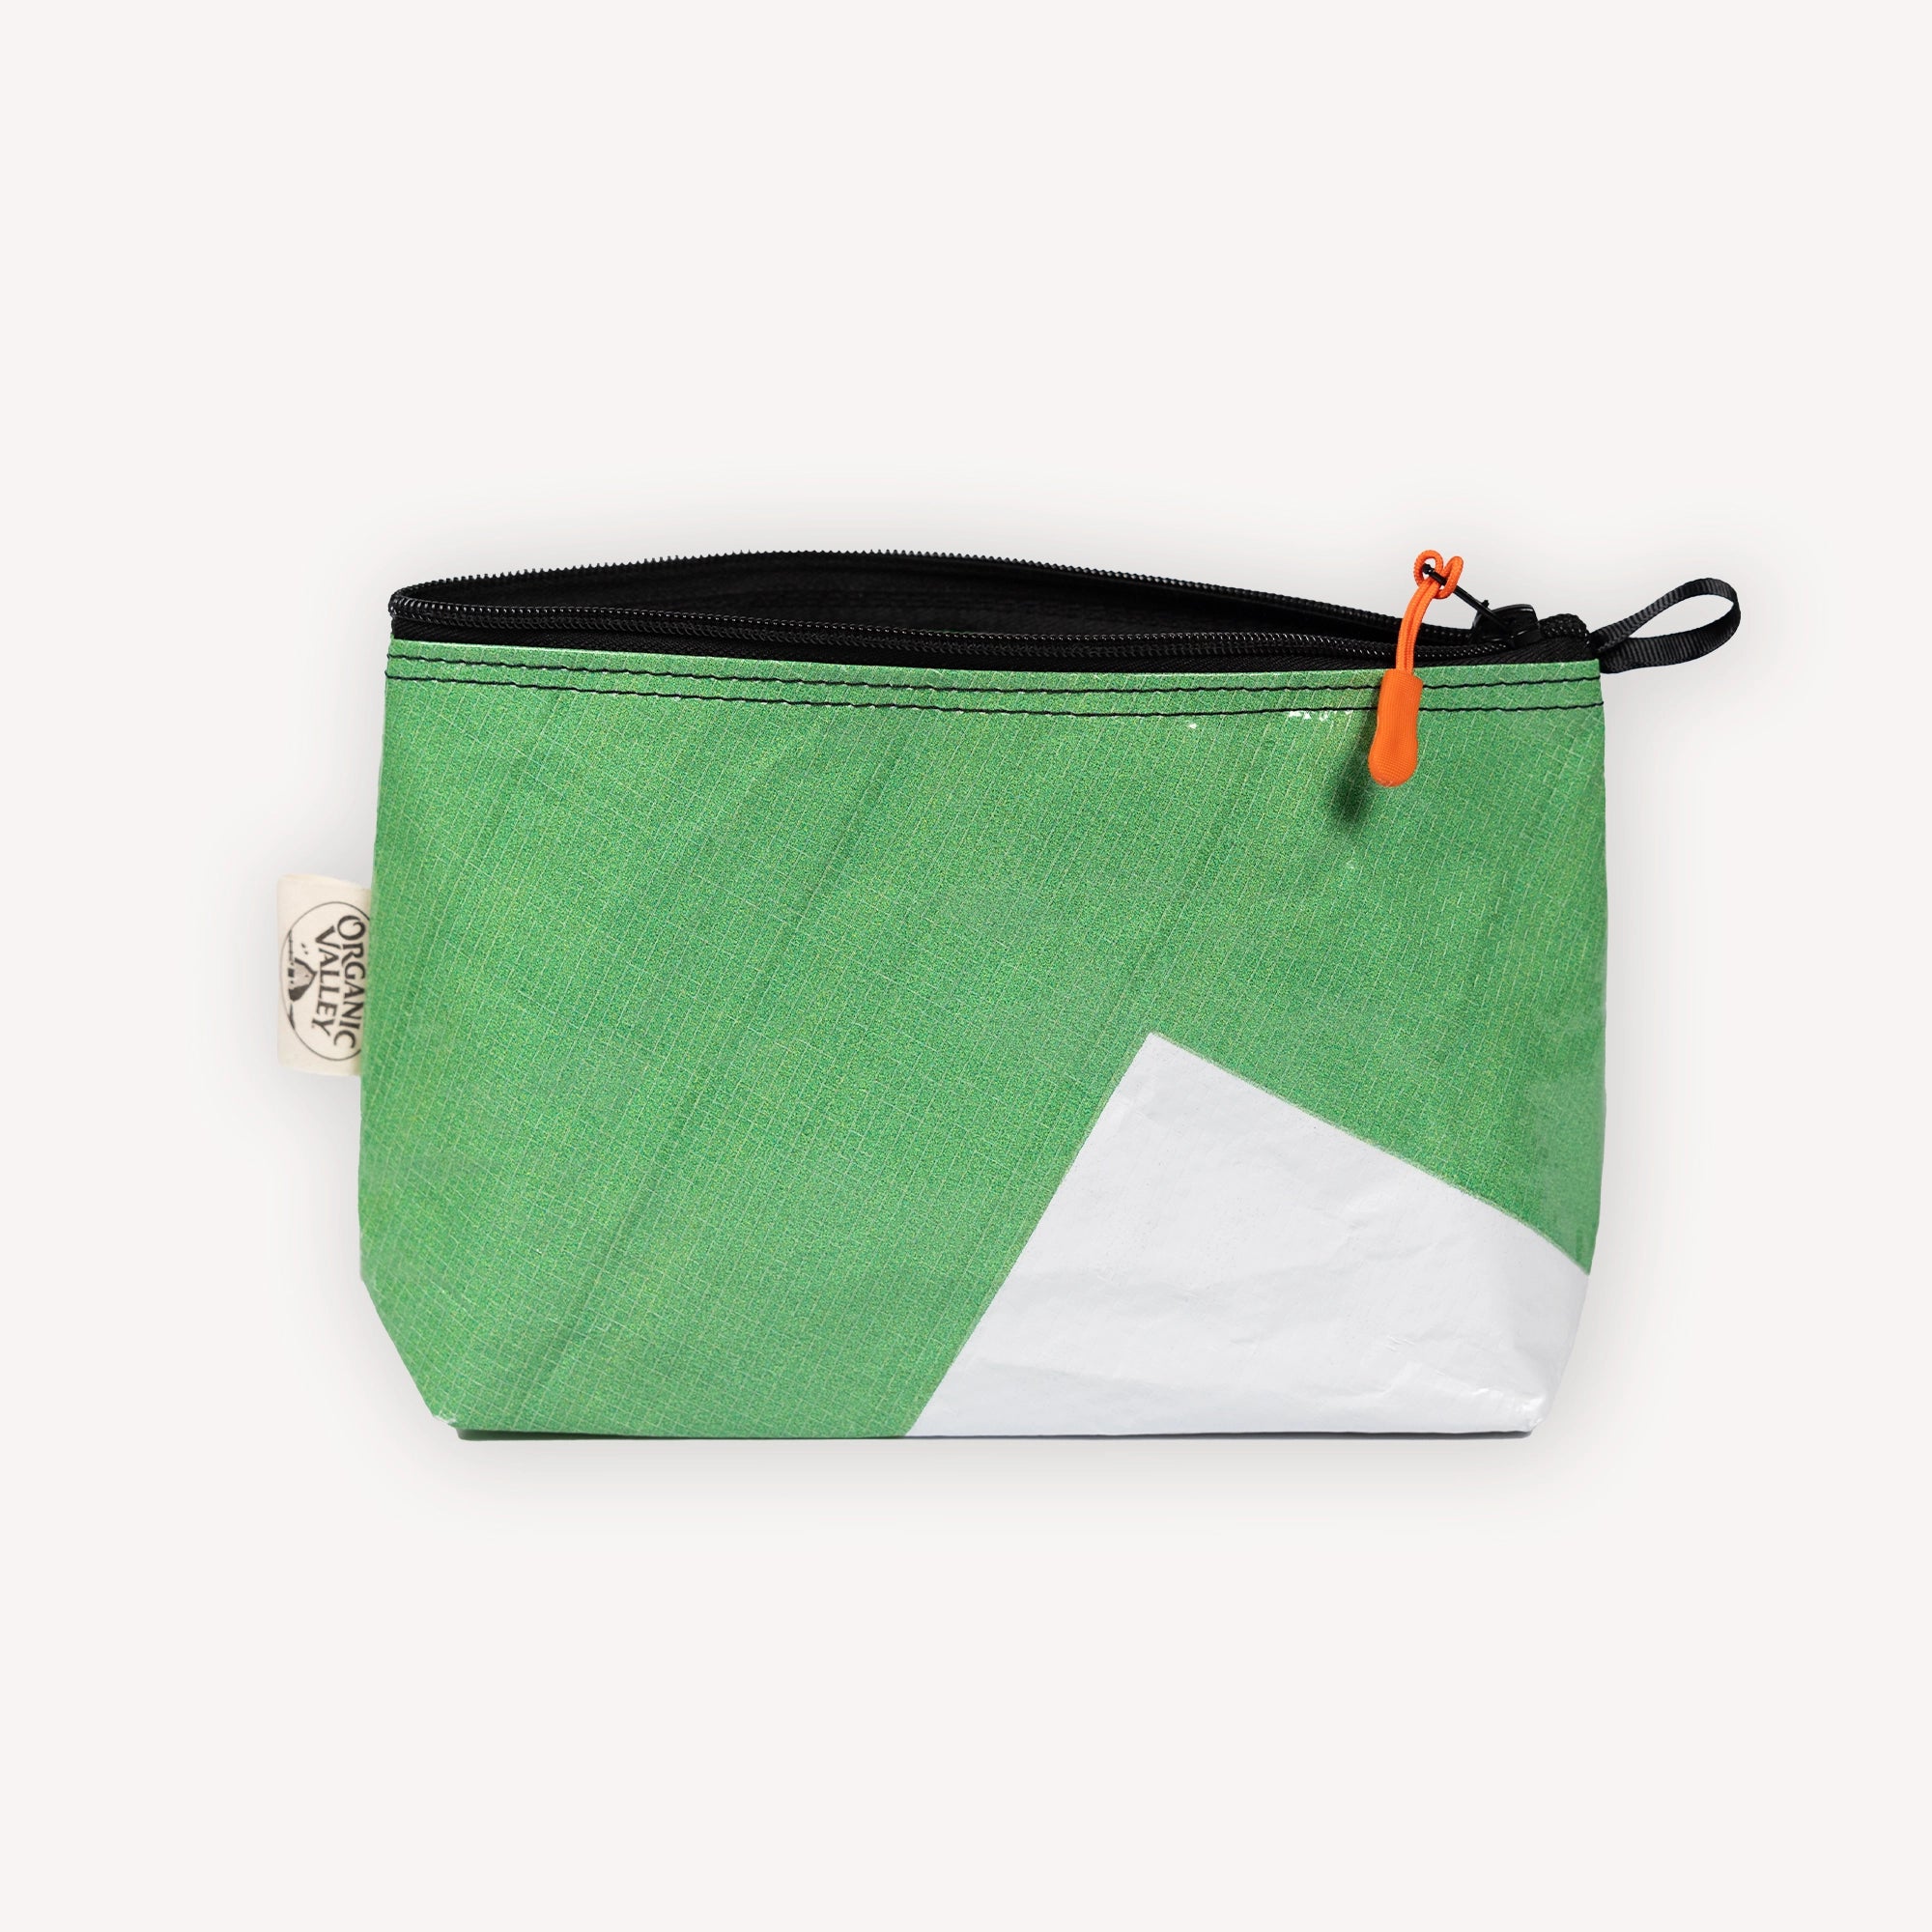 Visit the Upcycled Mini Zip Pouch Product Page